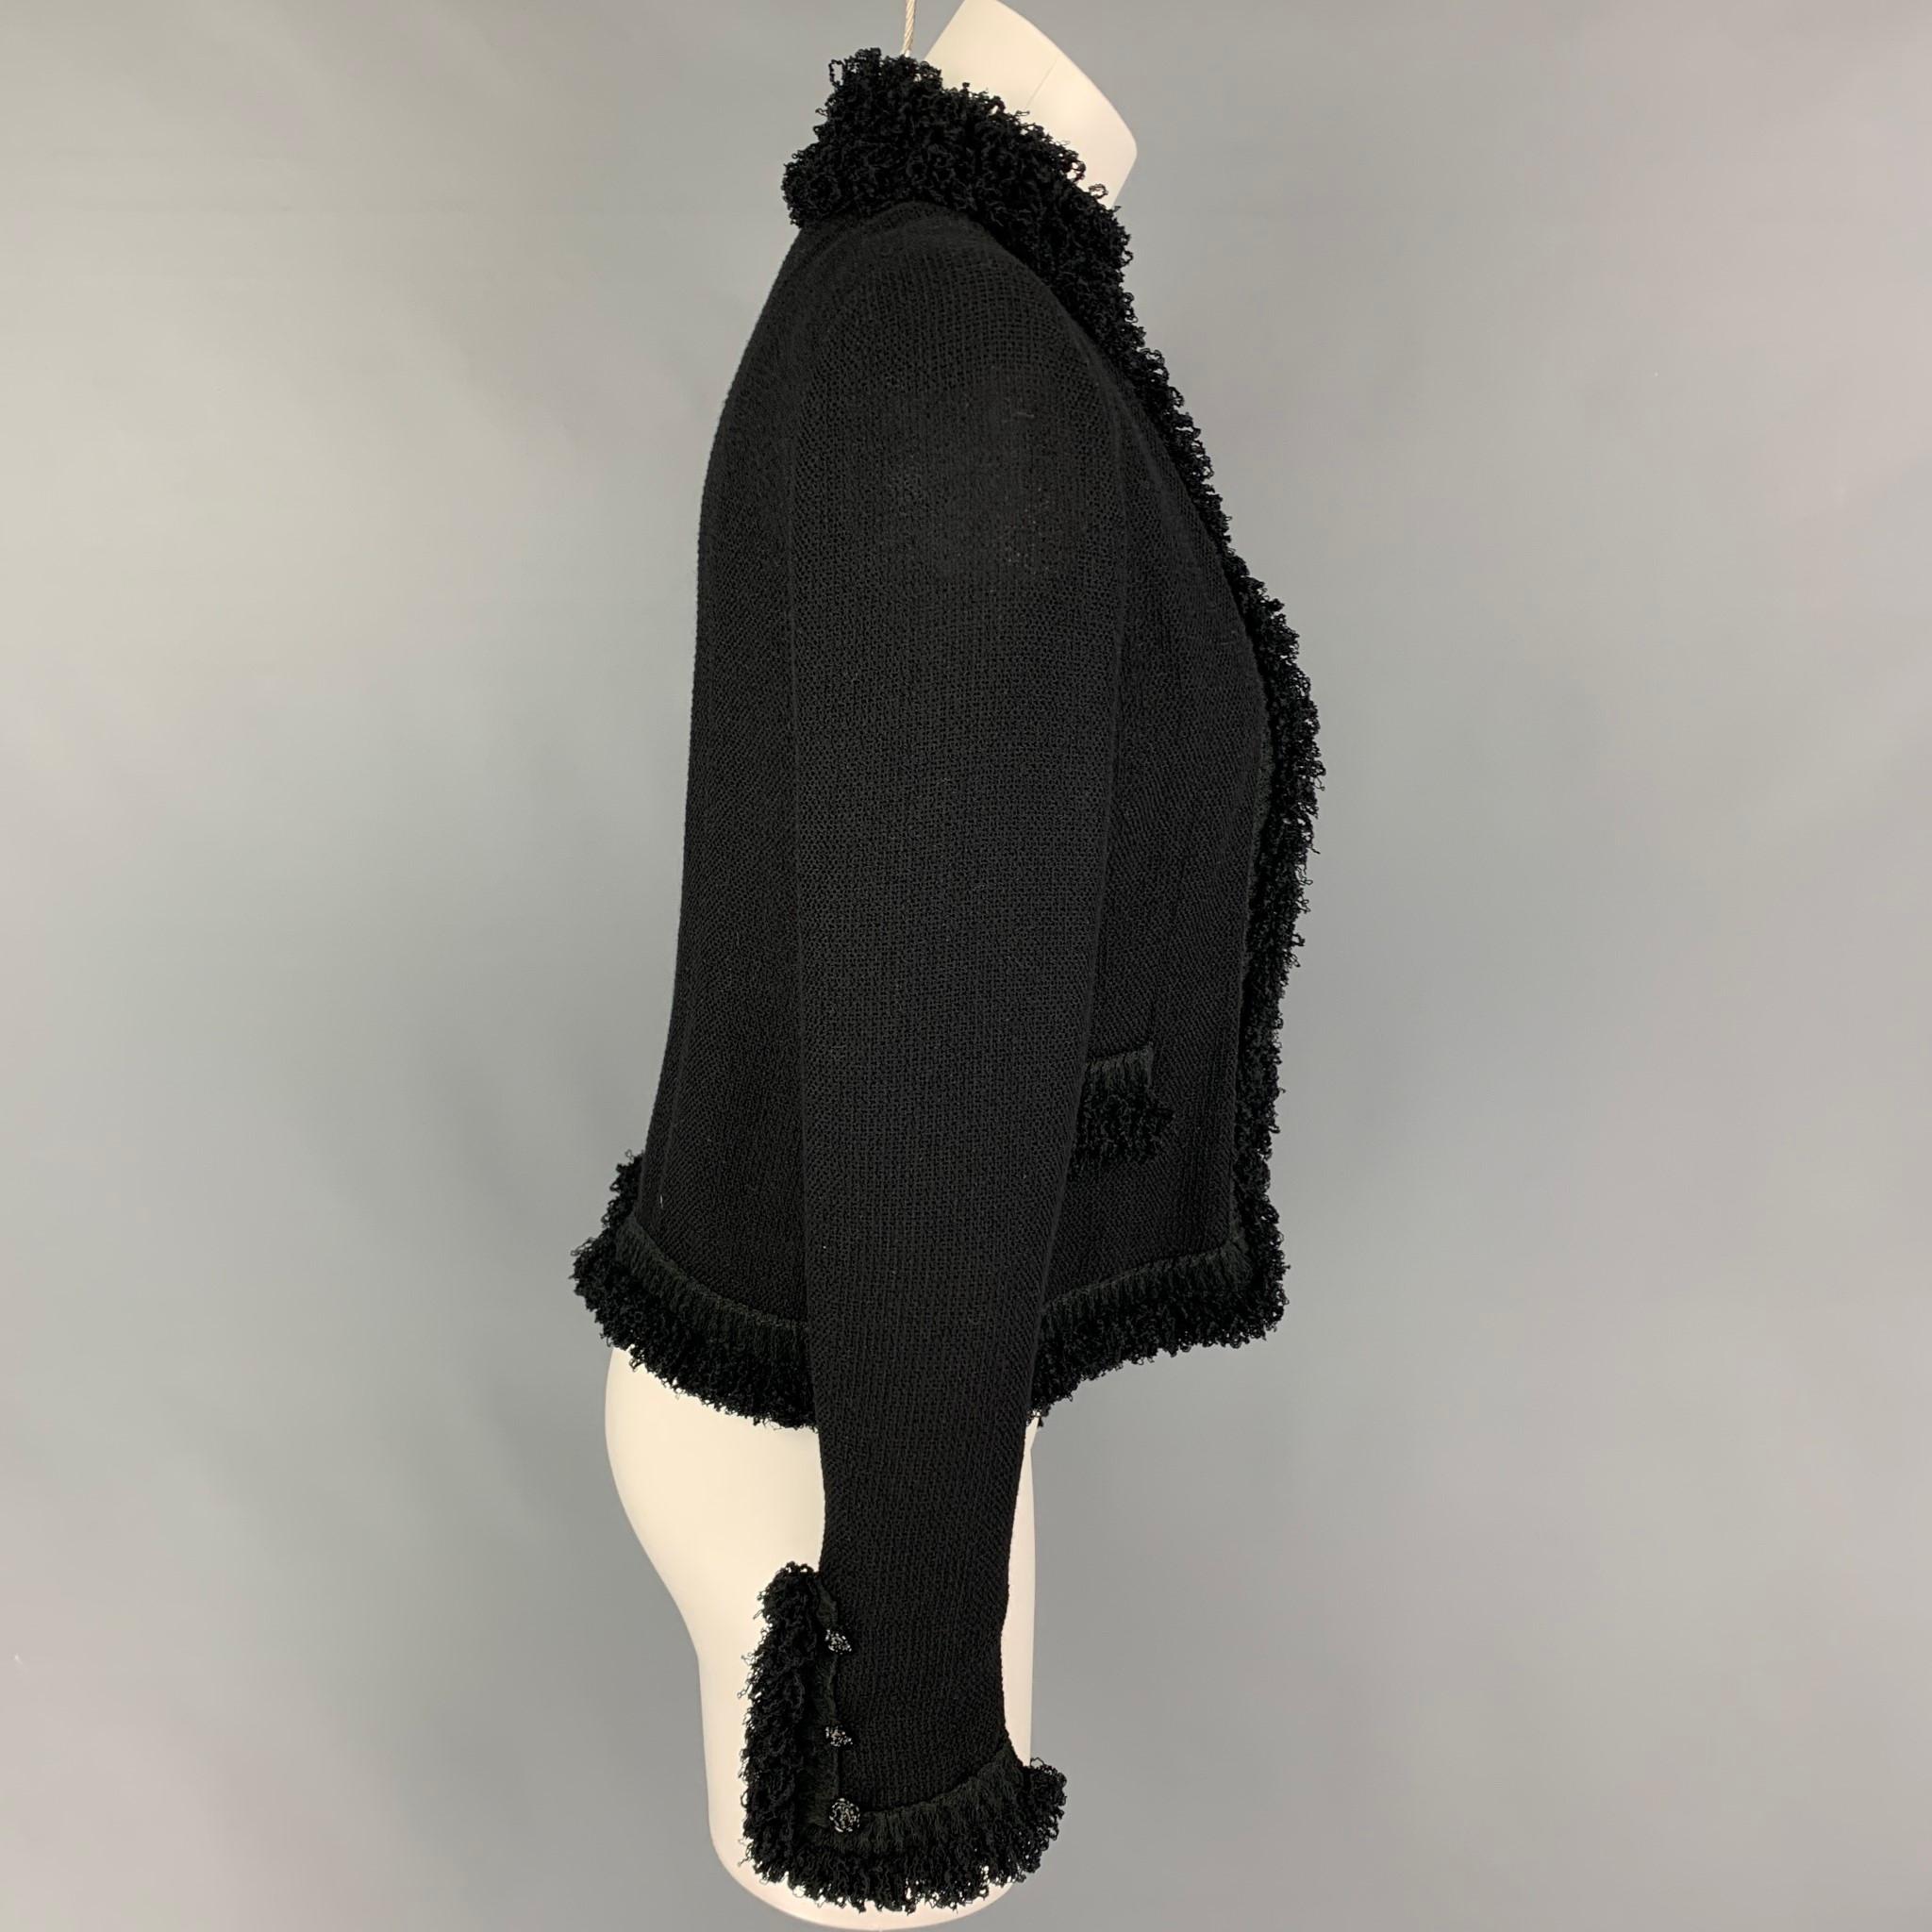 CHANEL jacket comes in a black wool blend featuring a ruffled trim, front pockets, and a single button closure. Made in France. 

Very Good Pre-Owned Condition.
Marked: 03C / 94305 36

Measurements:

Shoulder: 14.5 in.
Bust: 34 in.
Sleeve: 26